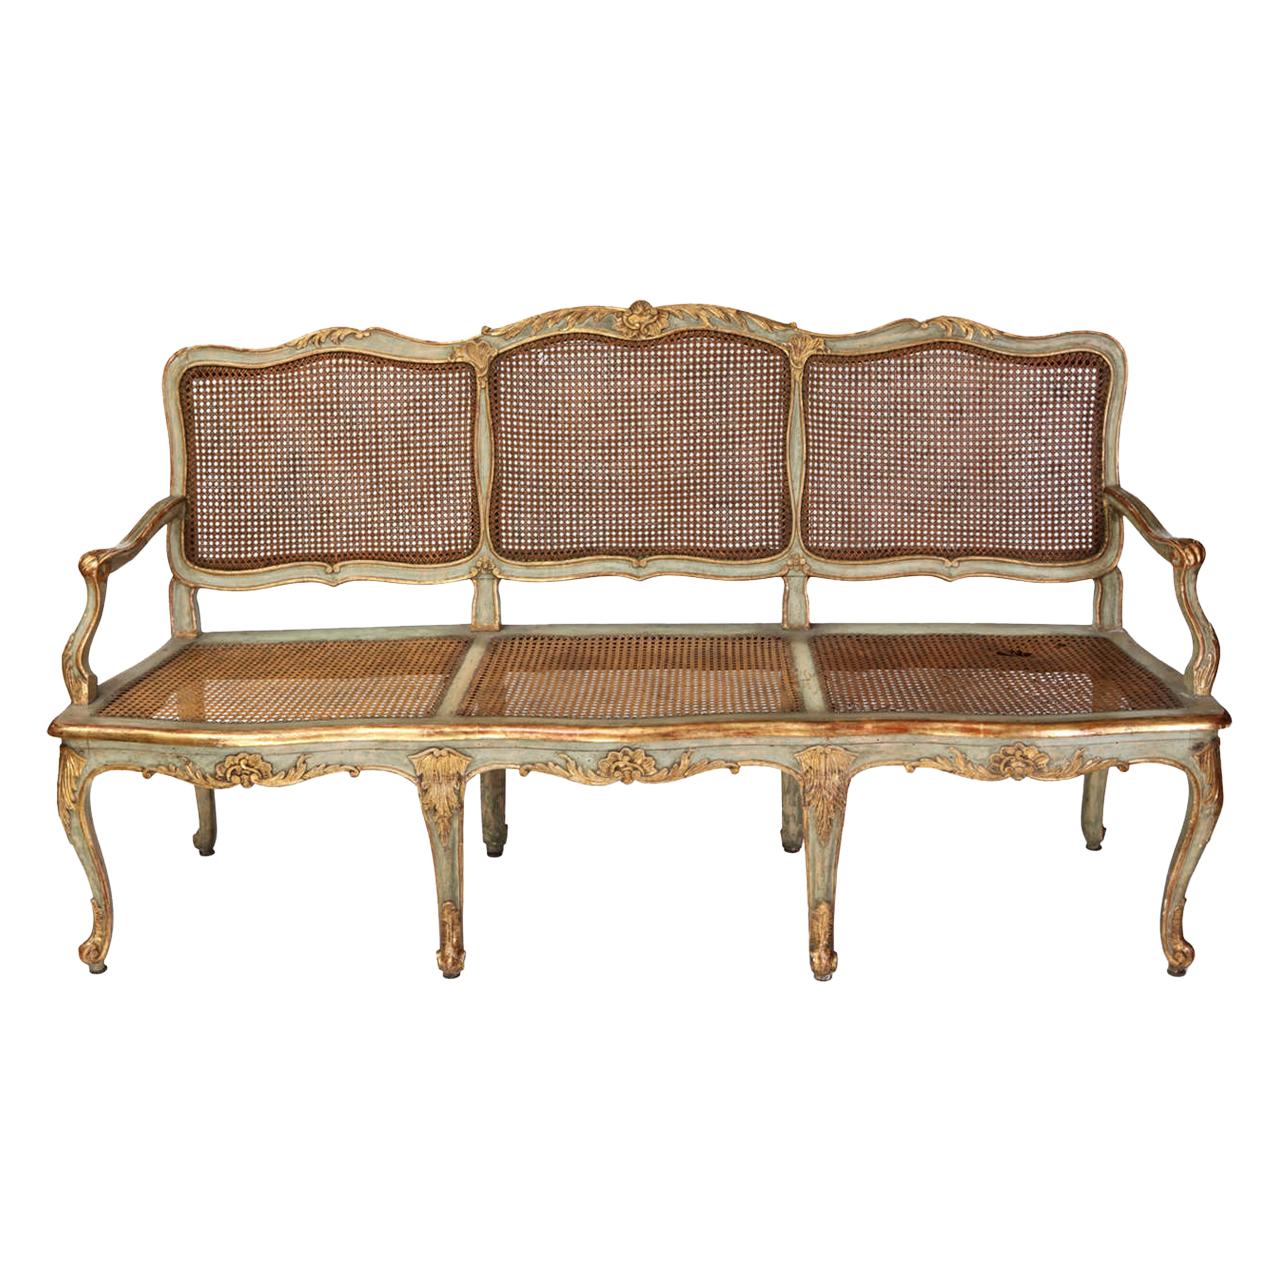 Italian Parcel-Gilt and Painted Canape or Sofa, 18th Century For Sale